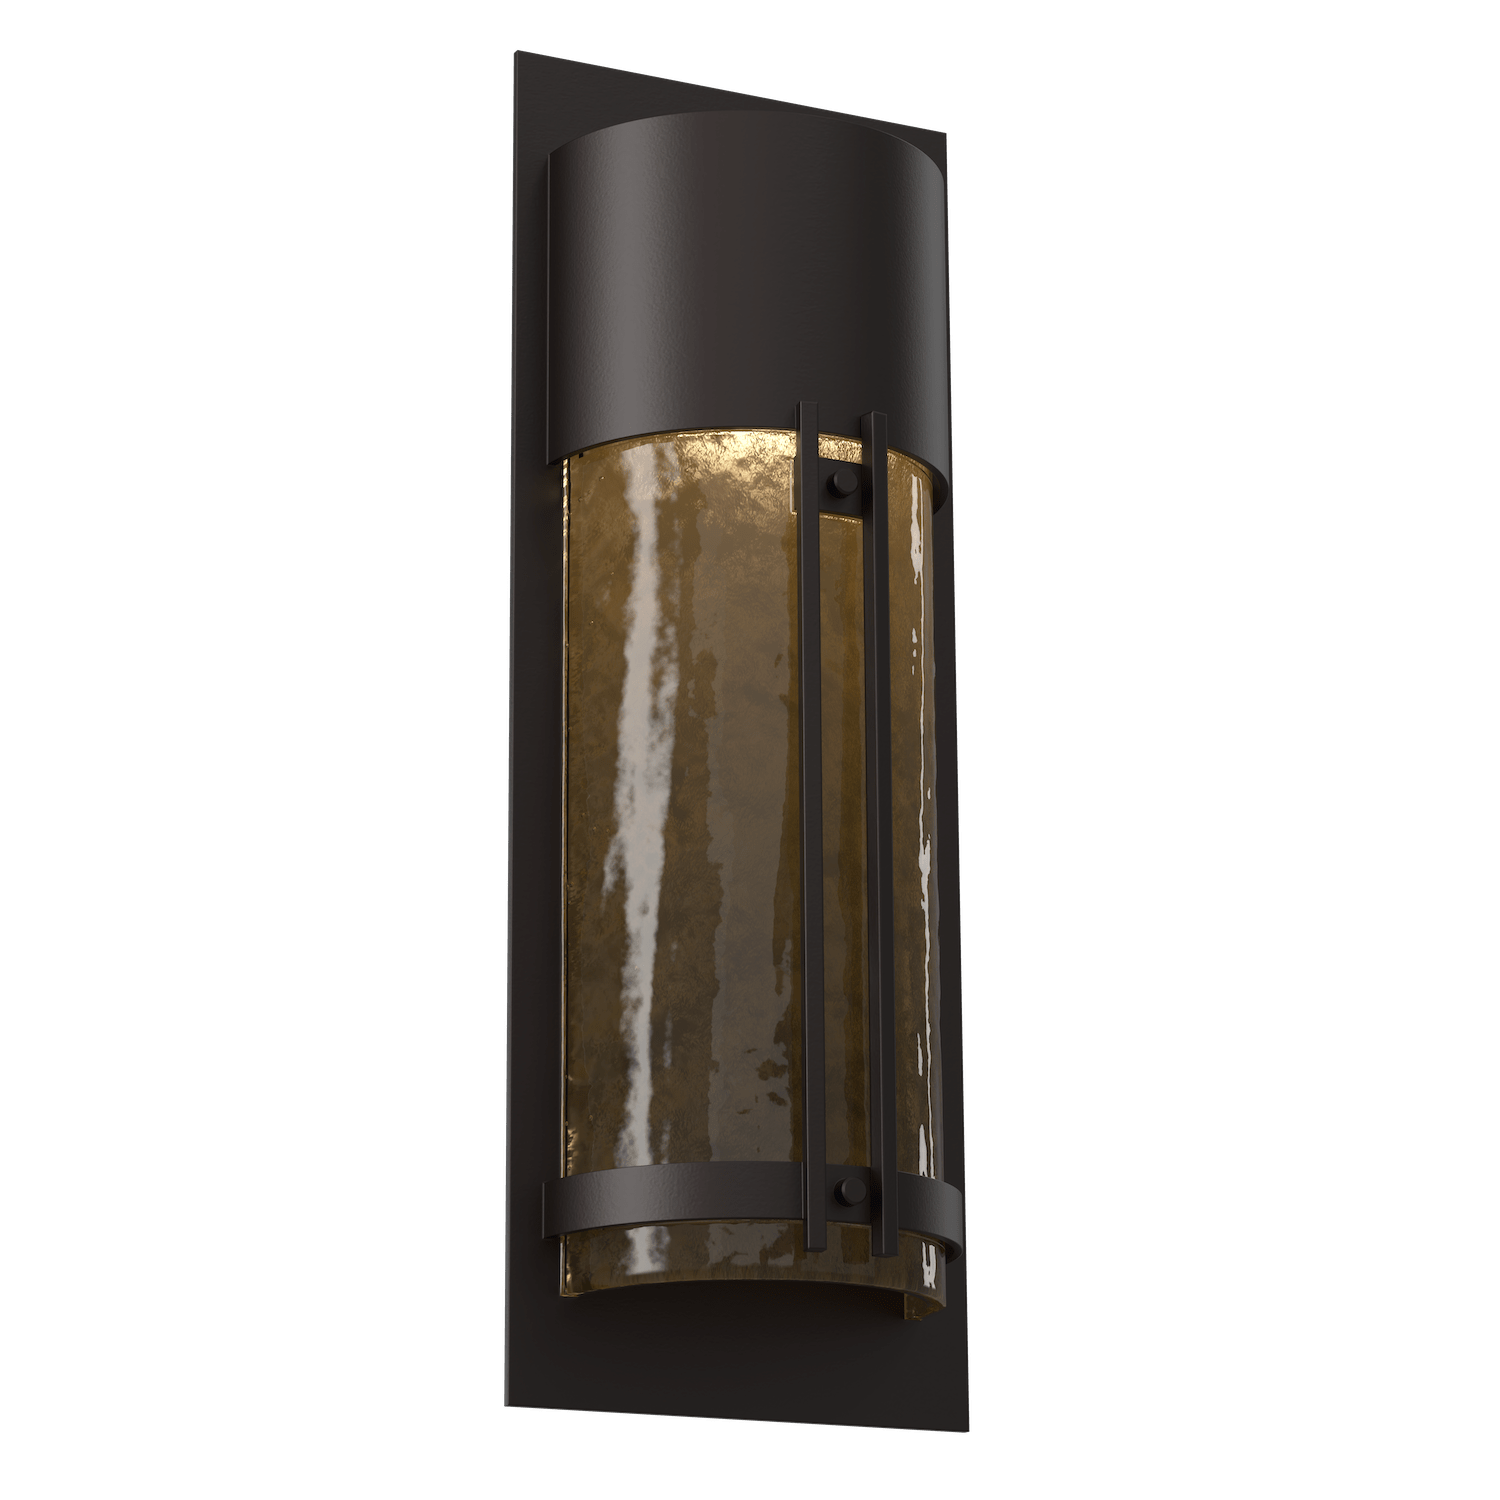 ODB0054-19-SB-BG-Hammerton-Studio-19-inch-outdoor-sconce-with-half-round-bronze-granite-glass-cover-with-statuary-bronze-finish-and-LED-lamping